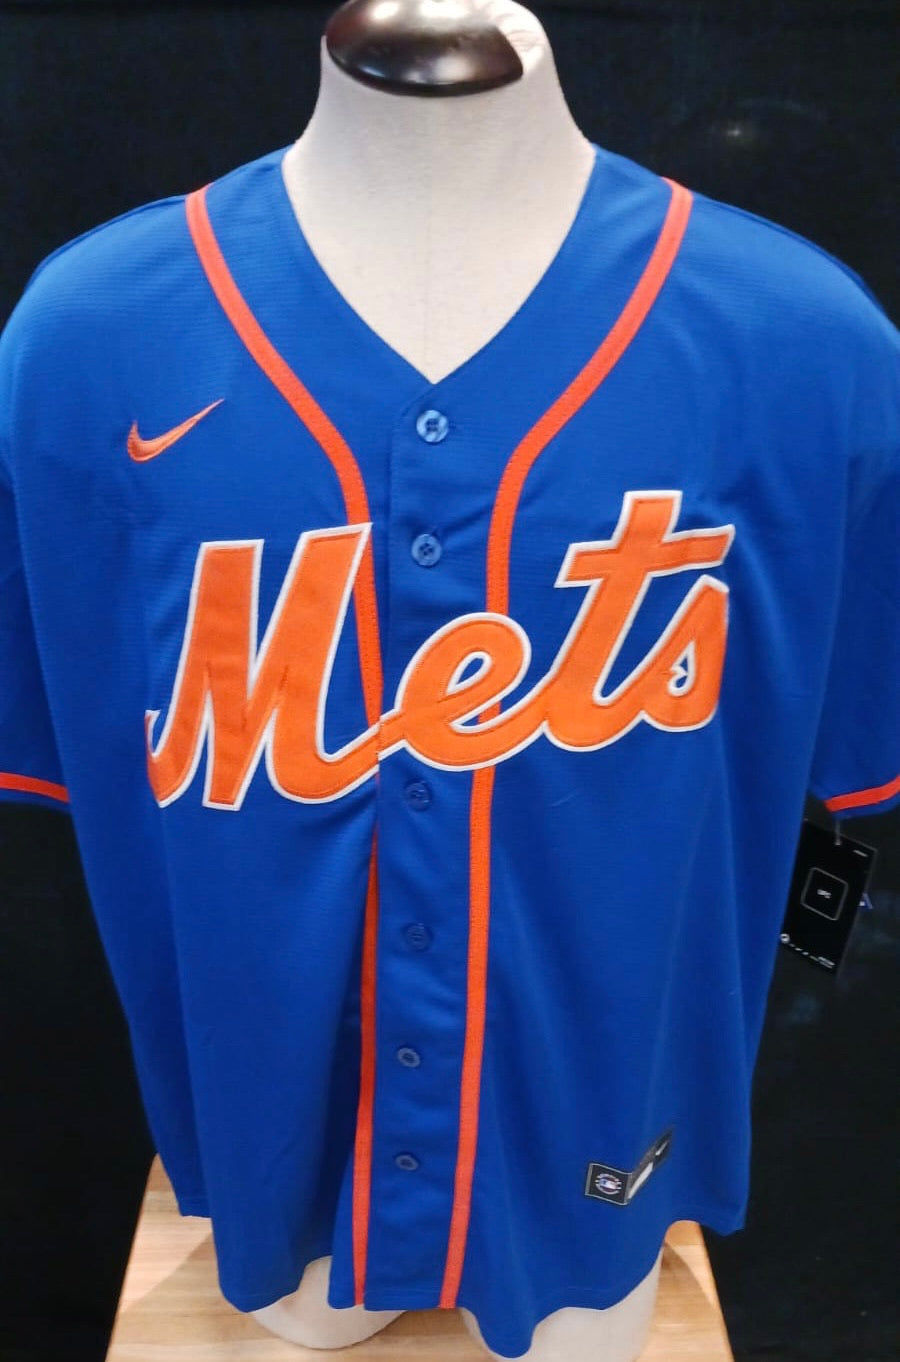 Mike Piazza New York Mets Jersey – Classic Authentics